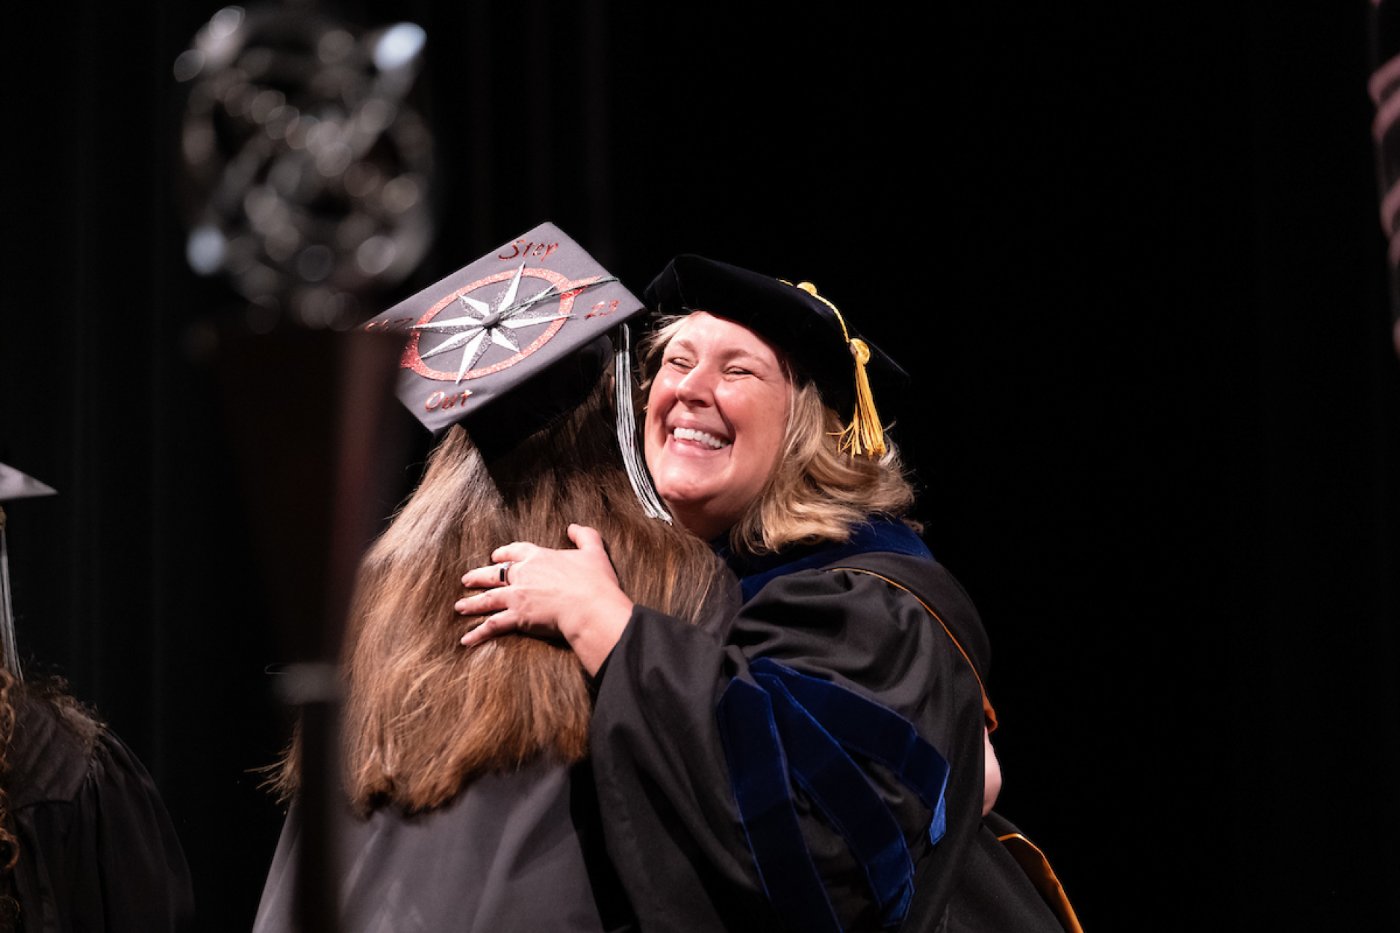 A faculty member embraced a student on the commencement stage